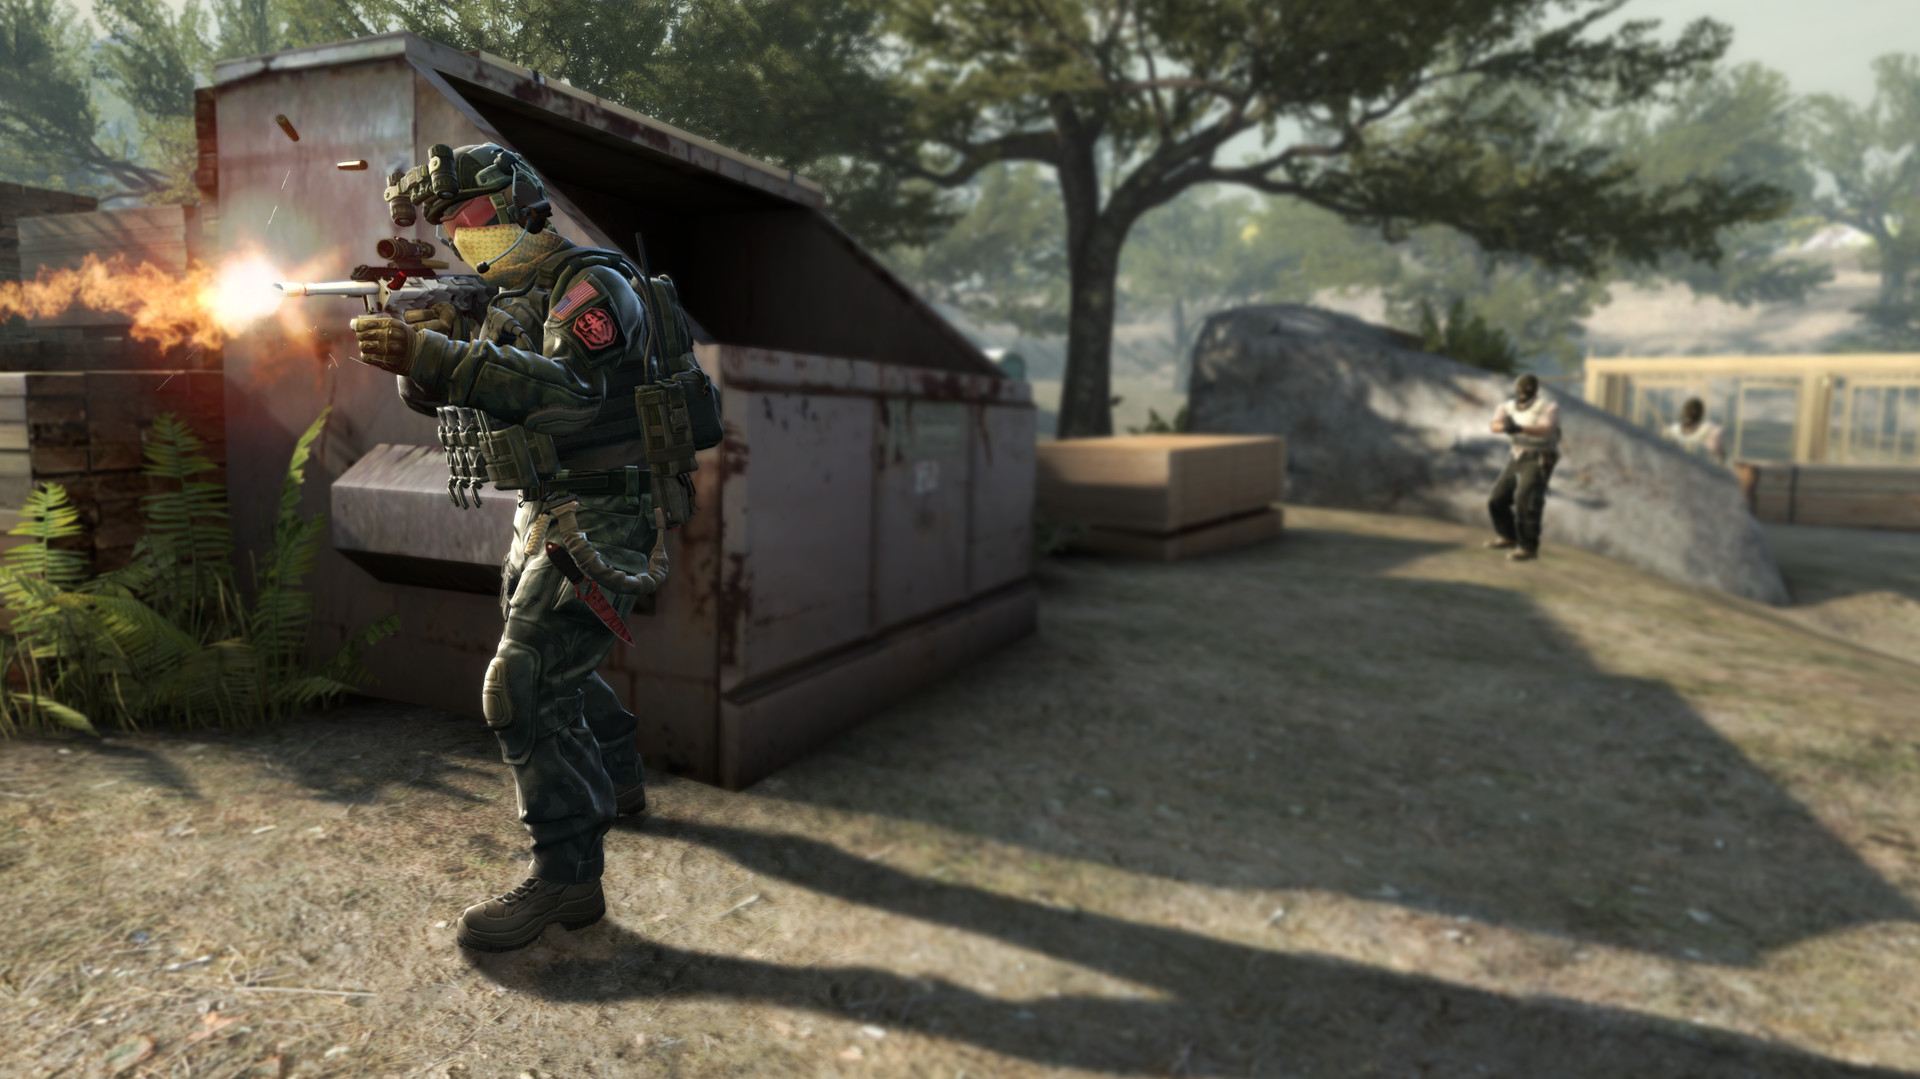 Screenshot for the game Counter-Strike: Global Offensive (CS: GO) [New Version] on PC